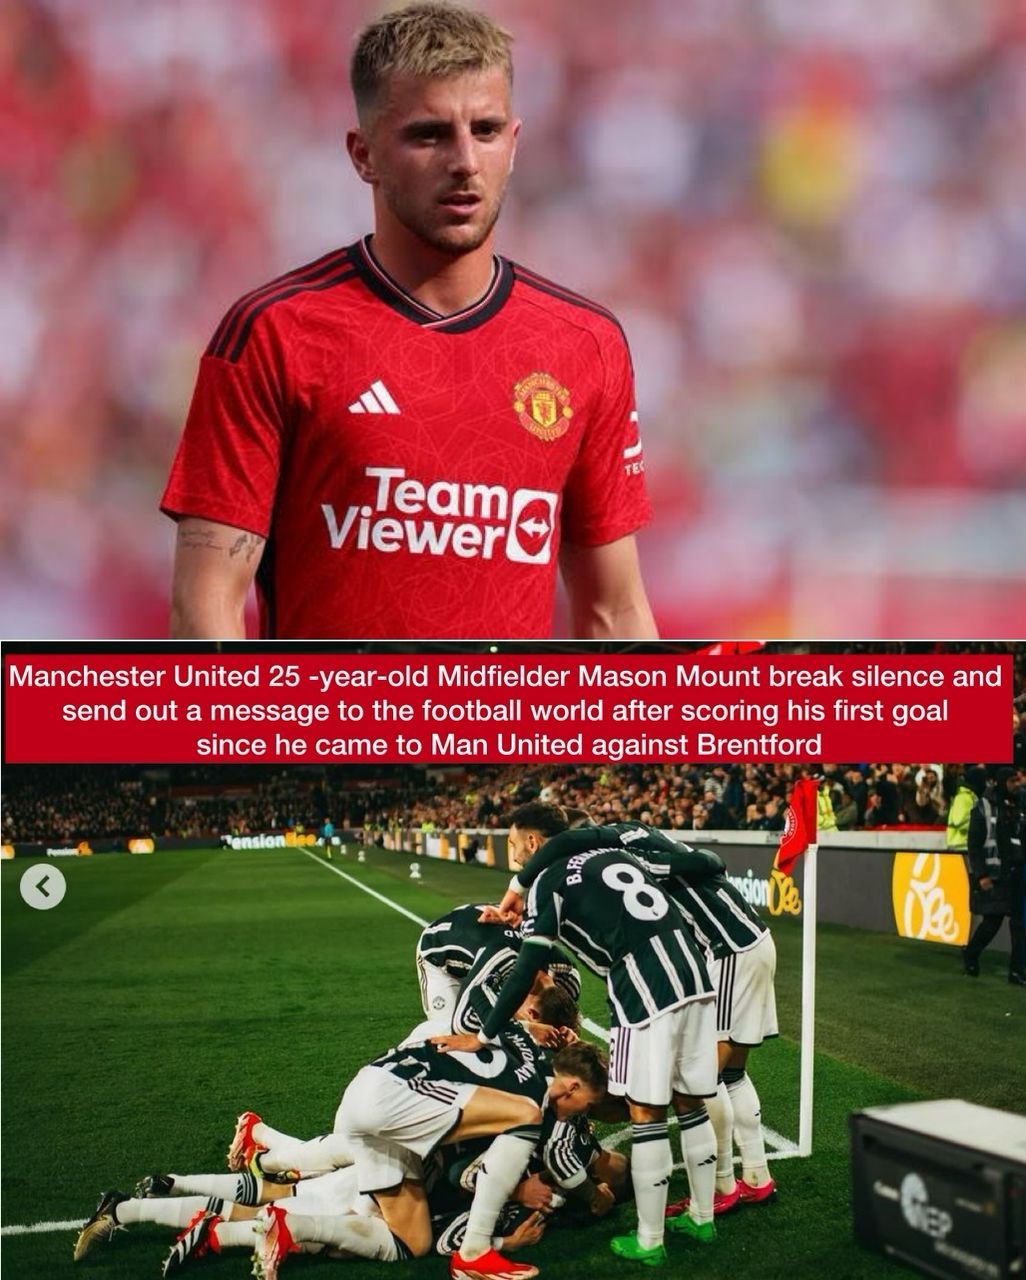 Manchester United 25-year-old Midfielder Mason Mount break silence and send out a message to the football world after scoring his first goal since he came to Man United